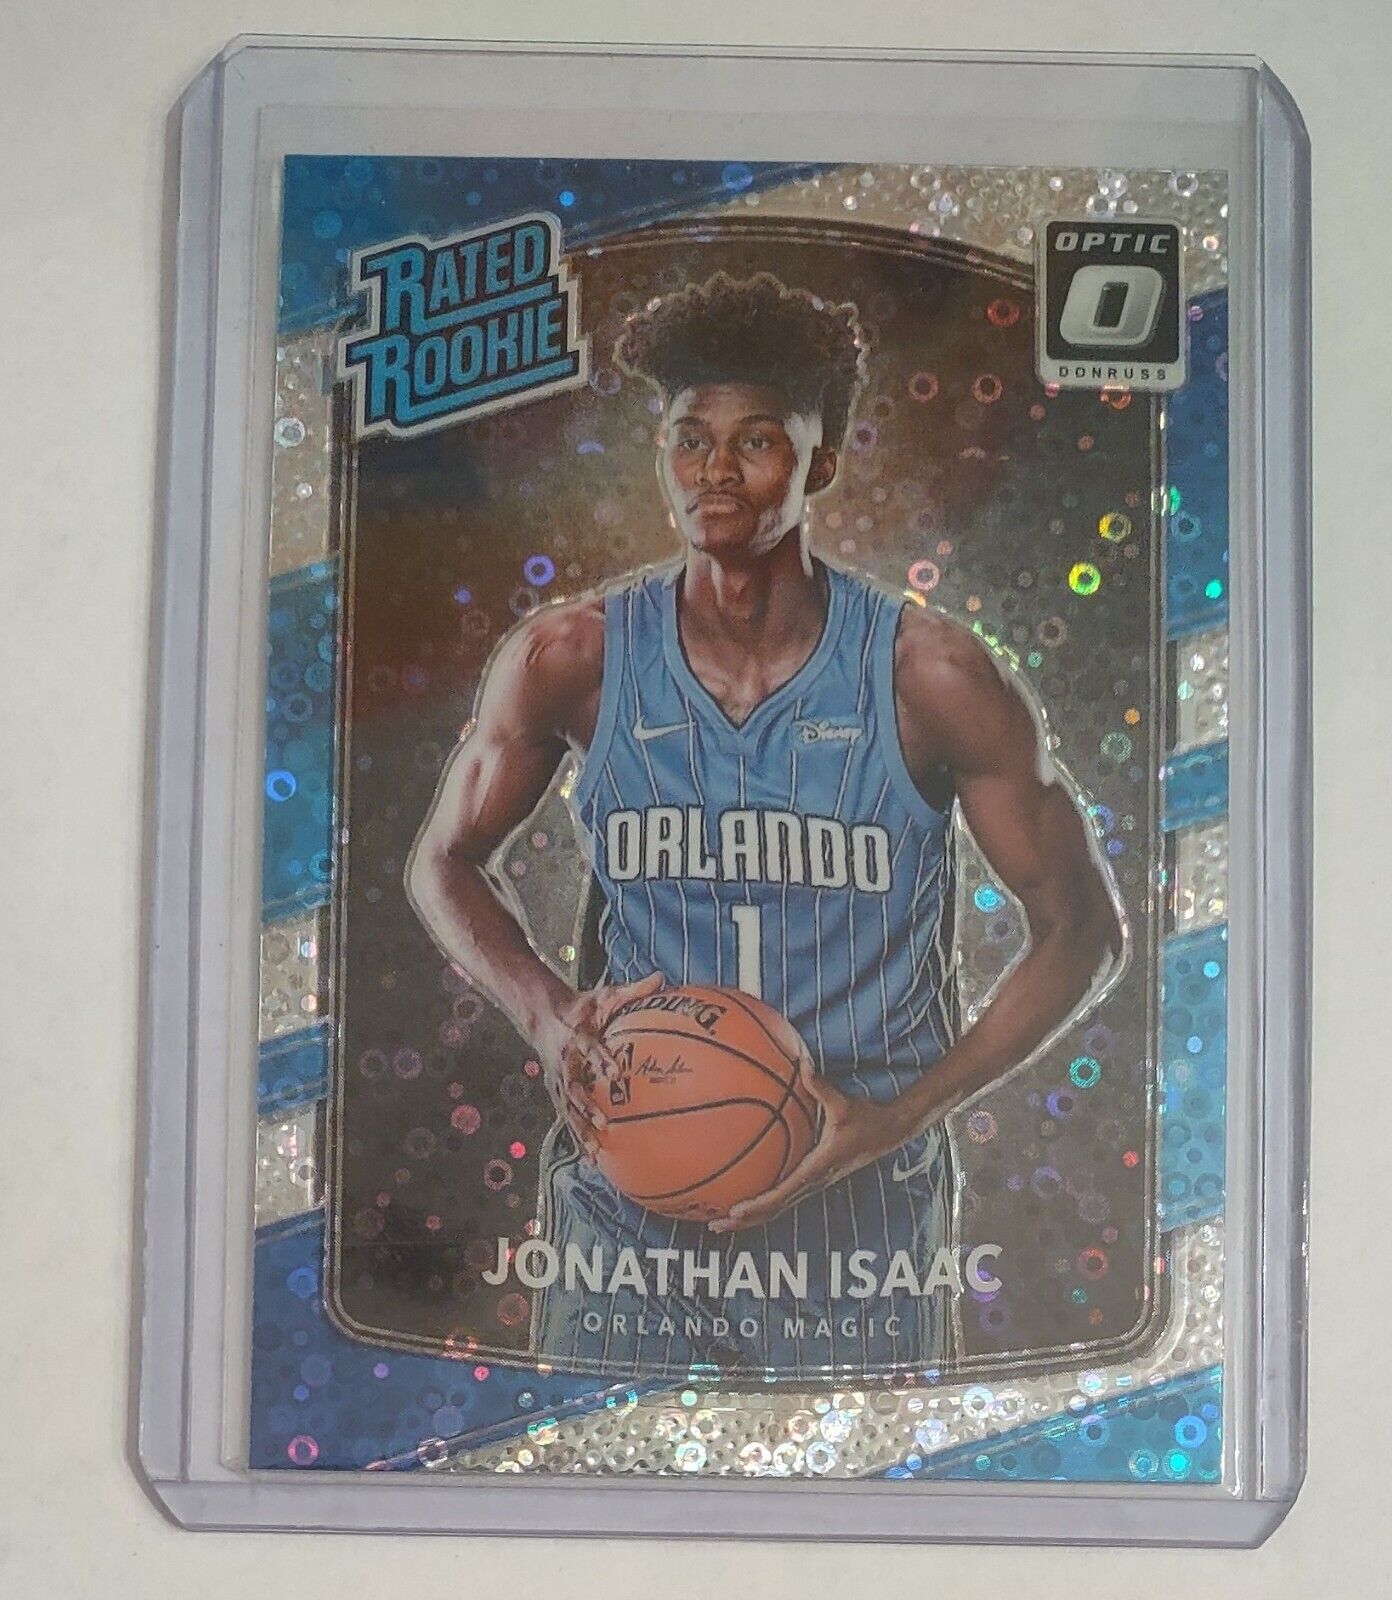 2017-18 DONRUSS OPTIC RATED ROOKIE RC JONATHAN ISAAC FAST BREAK PRIZM HOLO #195